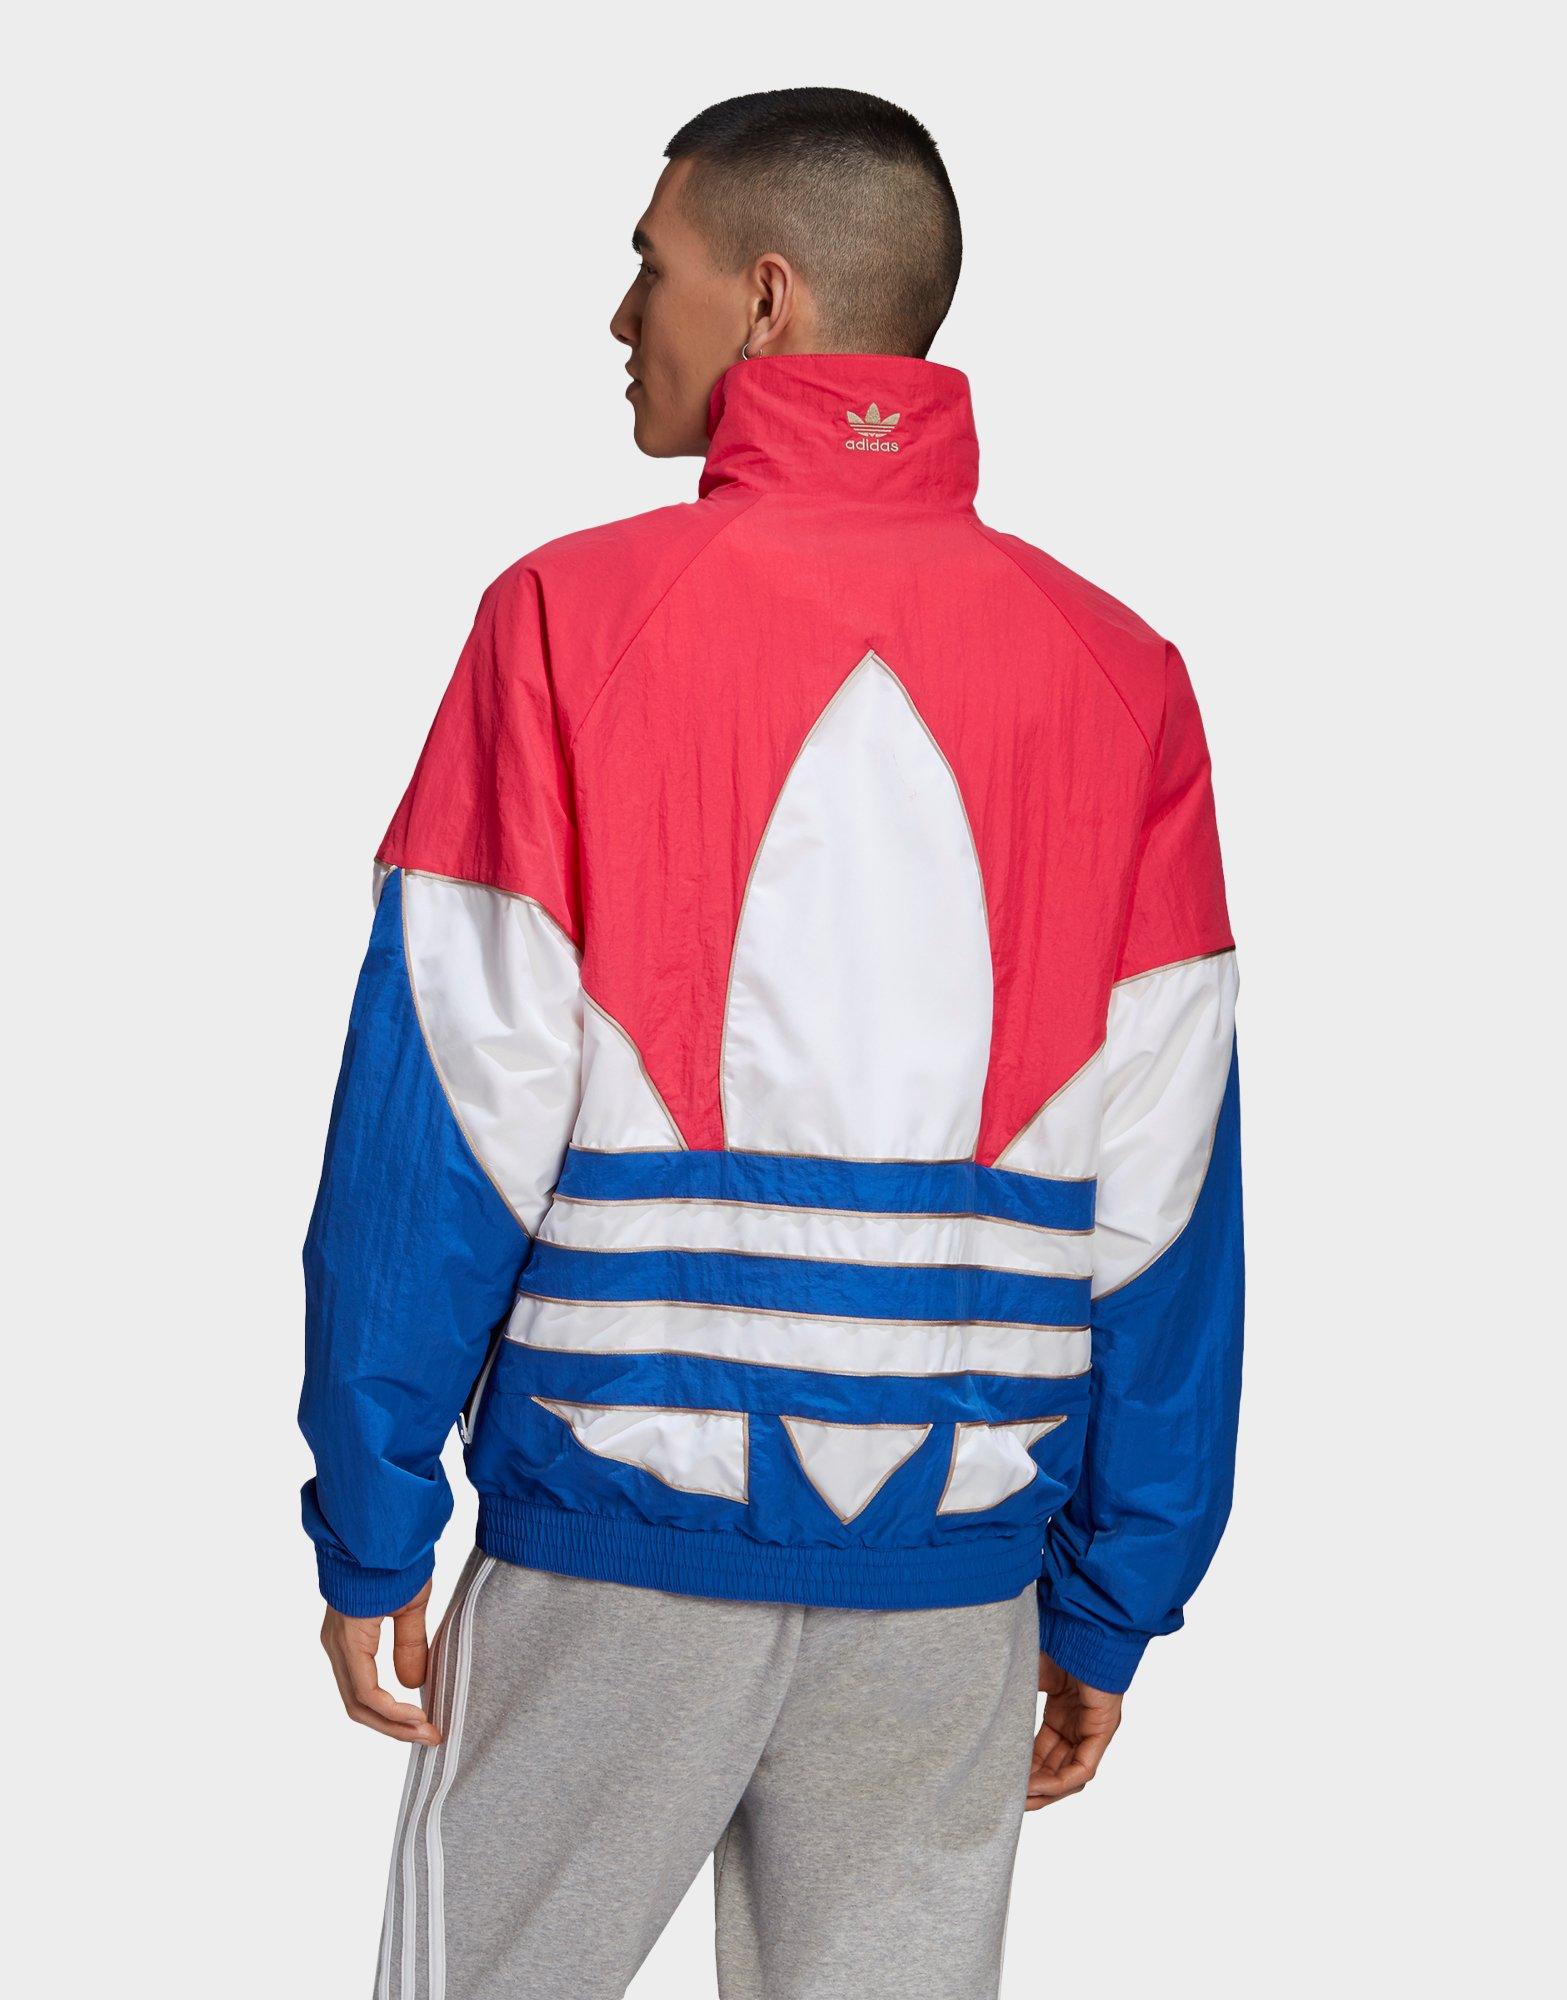 colorblock track jacket by adidas